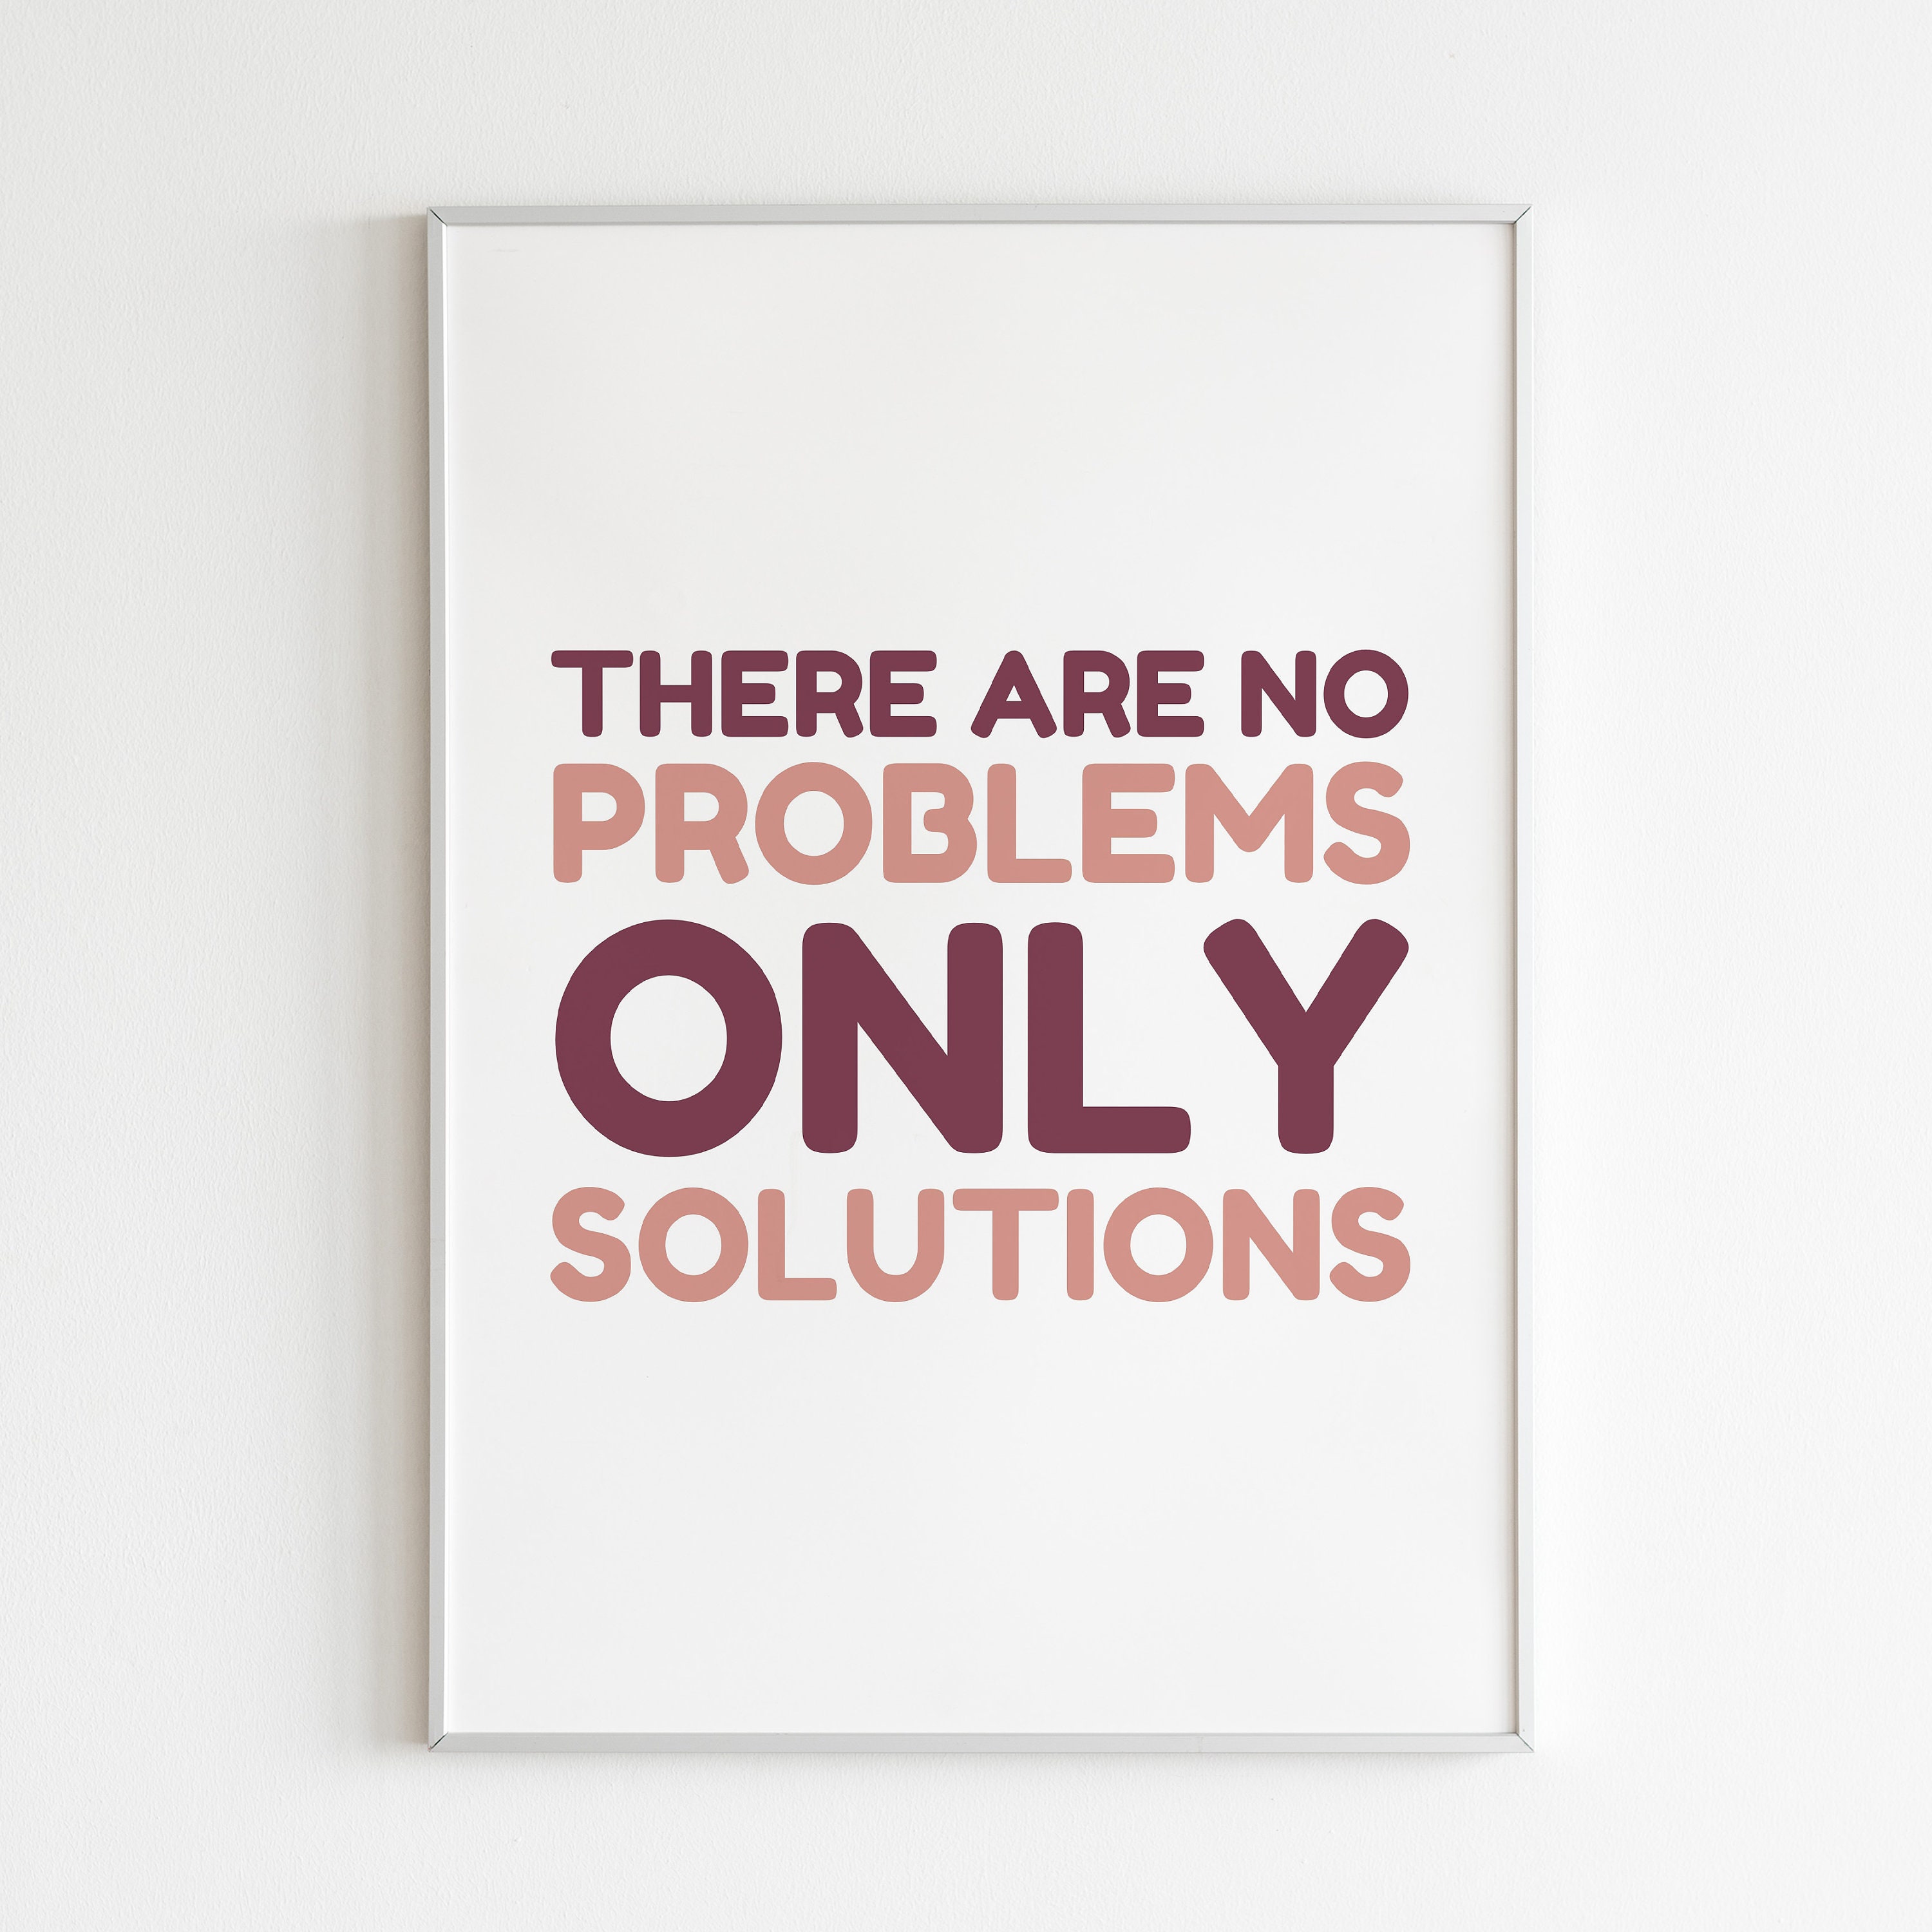 No problems, Only solutions | Sticker